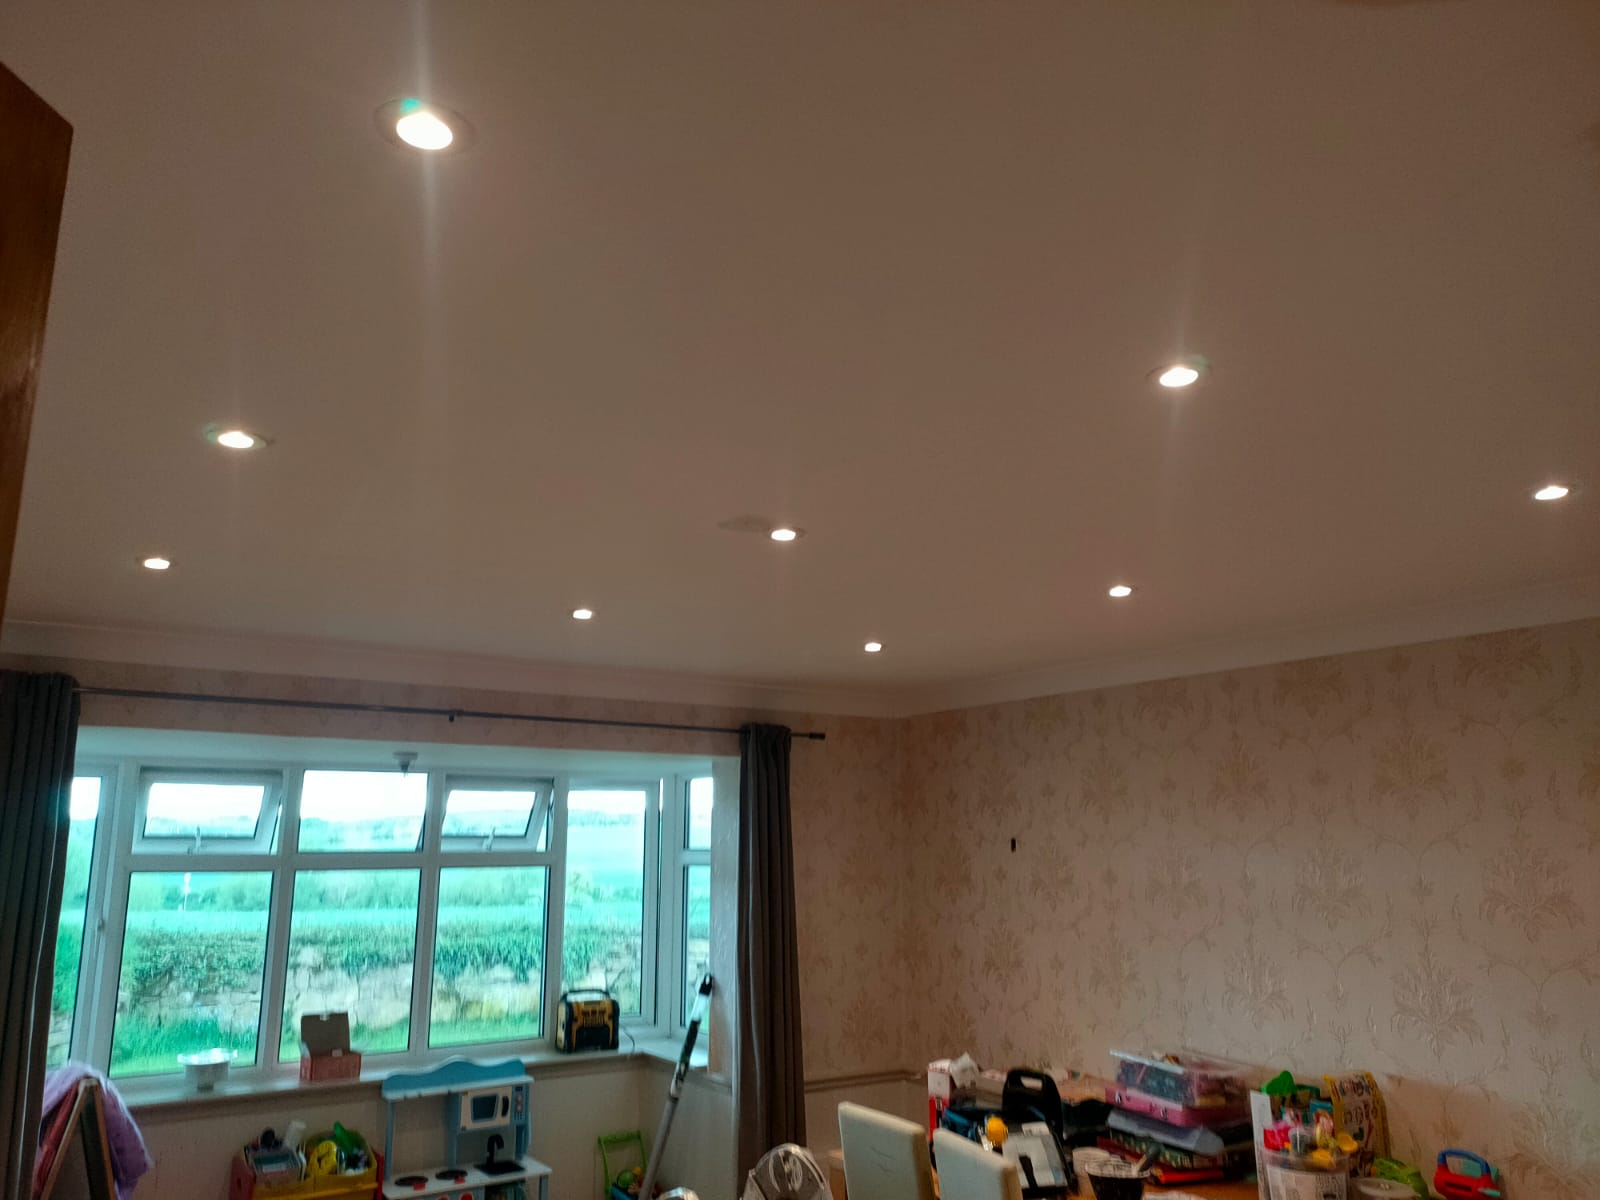 Each light works perfectly, all of the holes are sanded in, and can be painted by the customers decorator if they choose